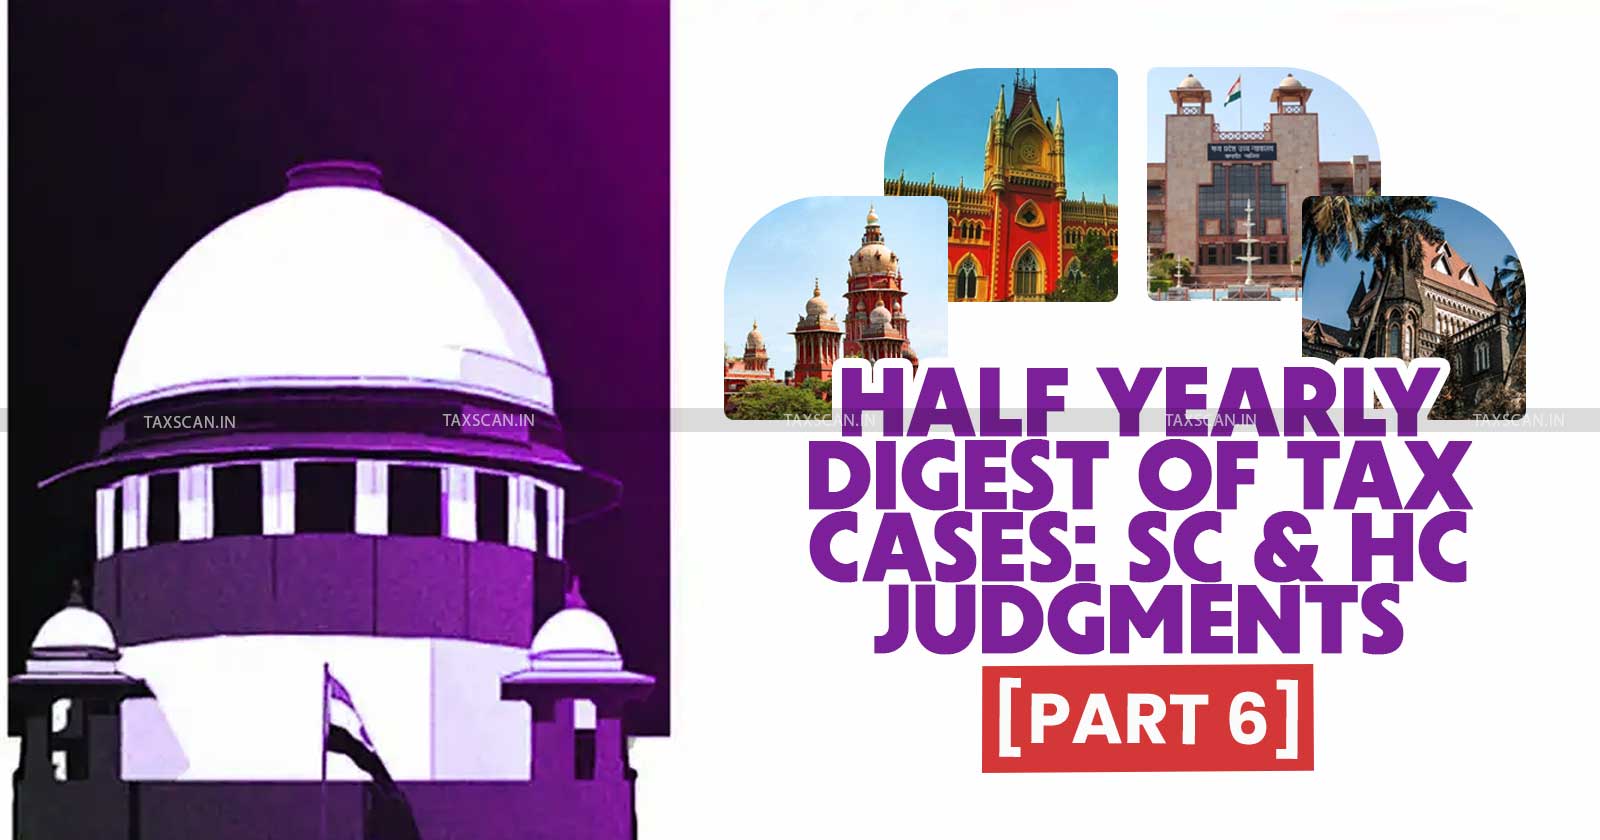 Half Yearly Case Digest - Supreme Court and High Courts Case Digest - Half Yearly Digest of Tax Cases - Supreme Court Tax Judgments - Supreme Court Tax Judgments - taxscan